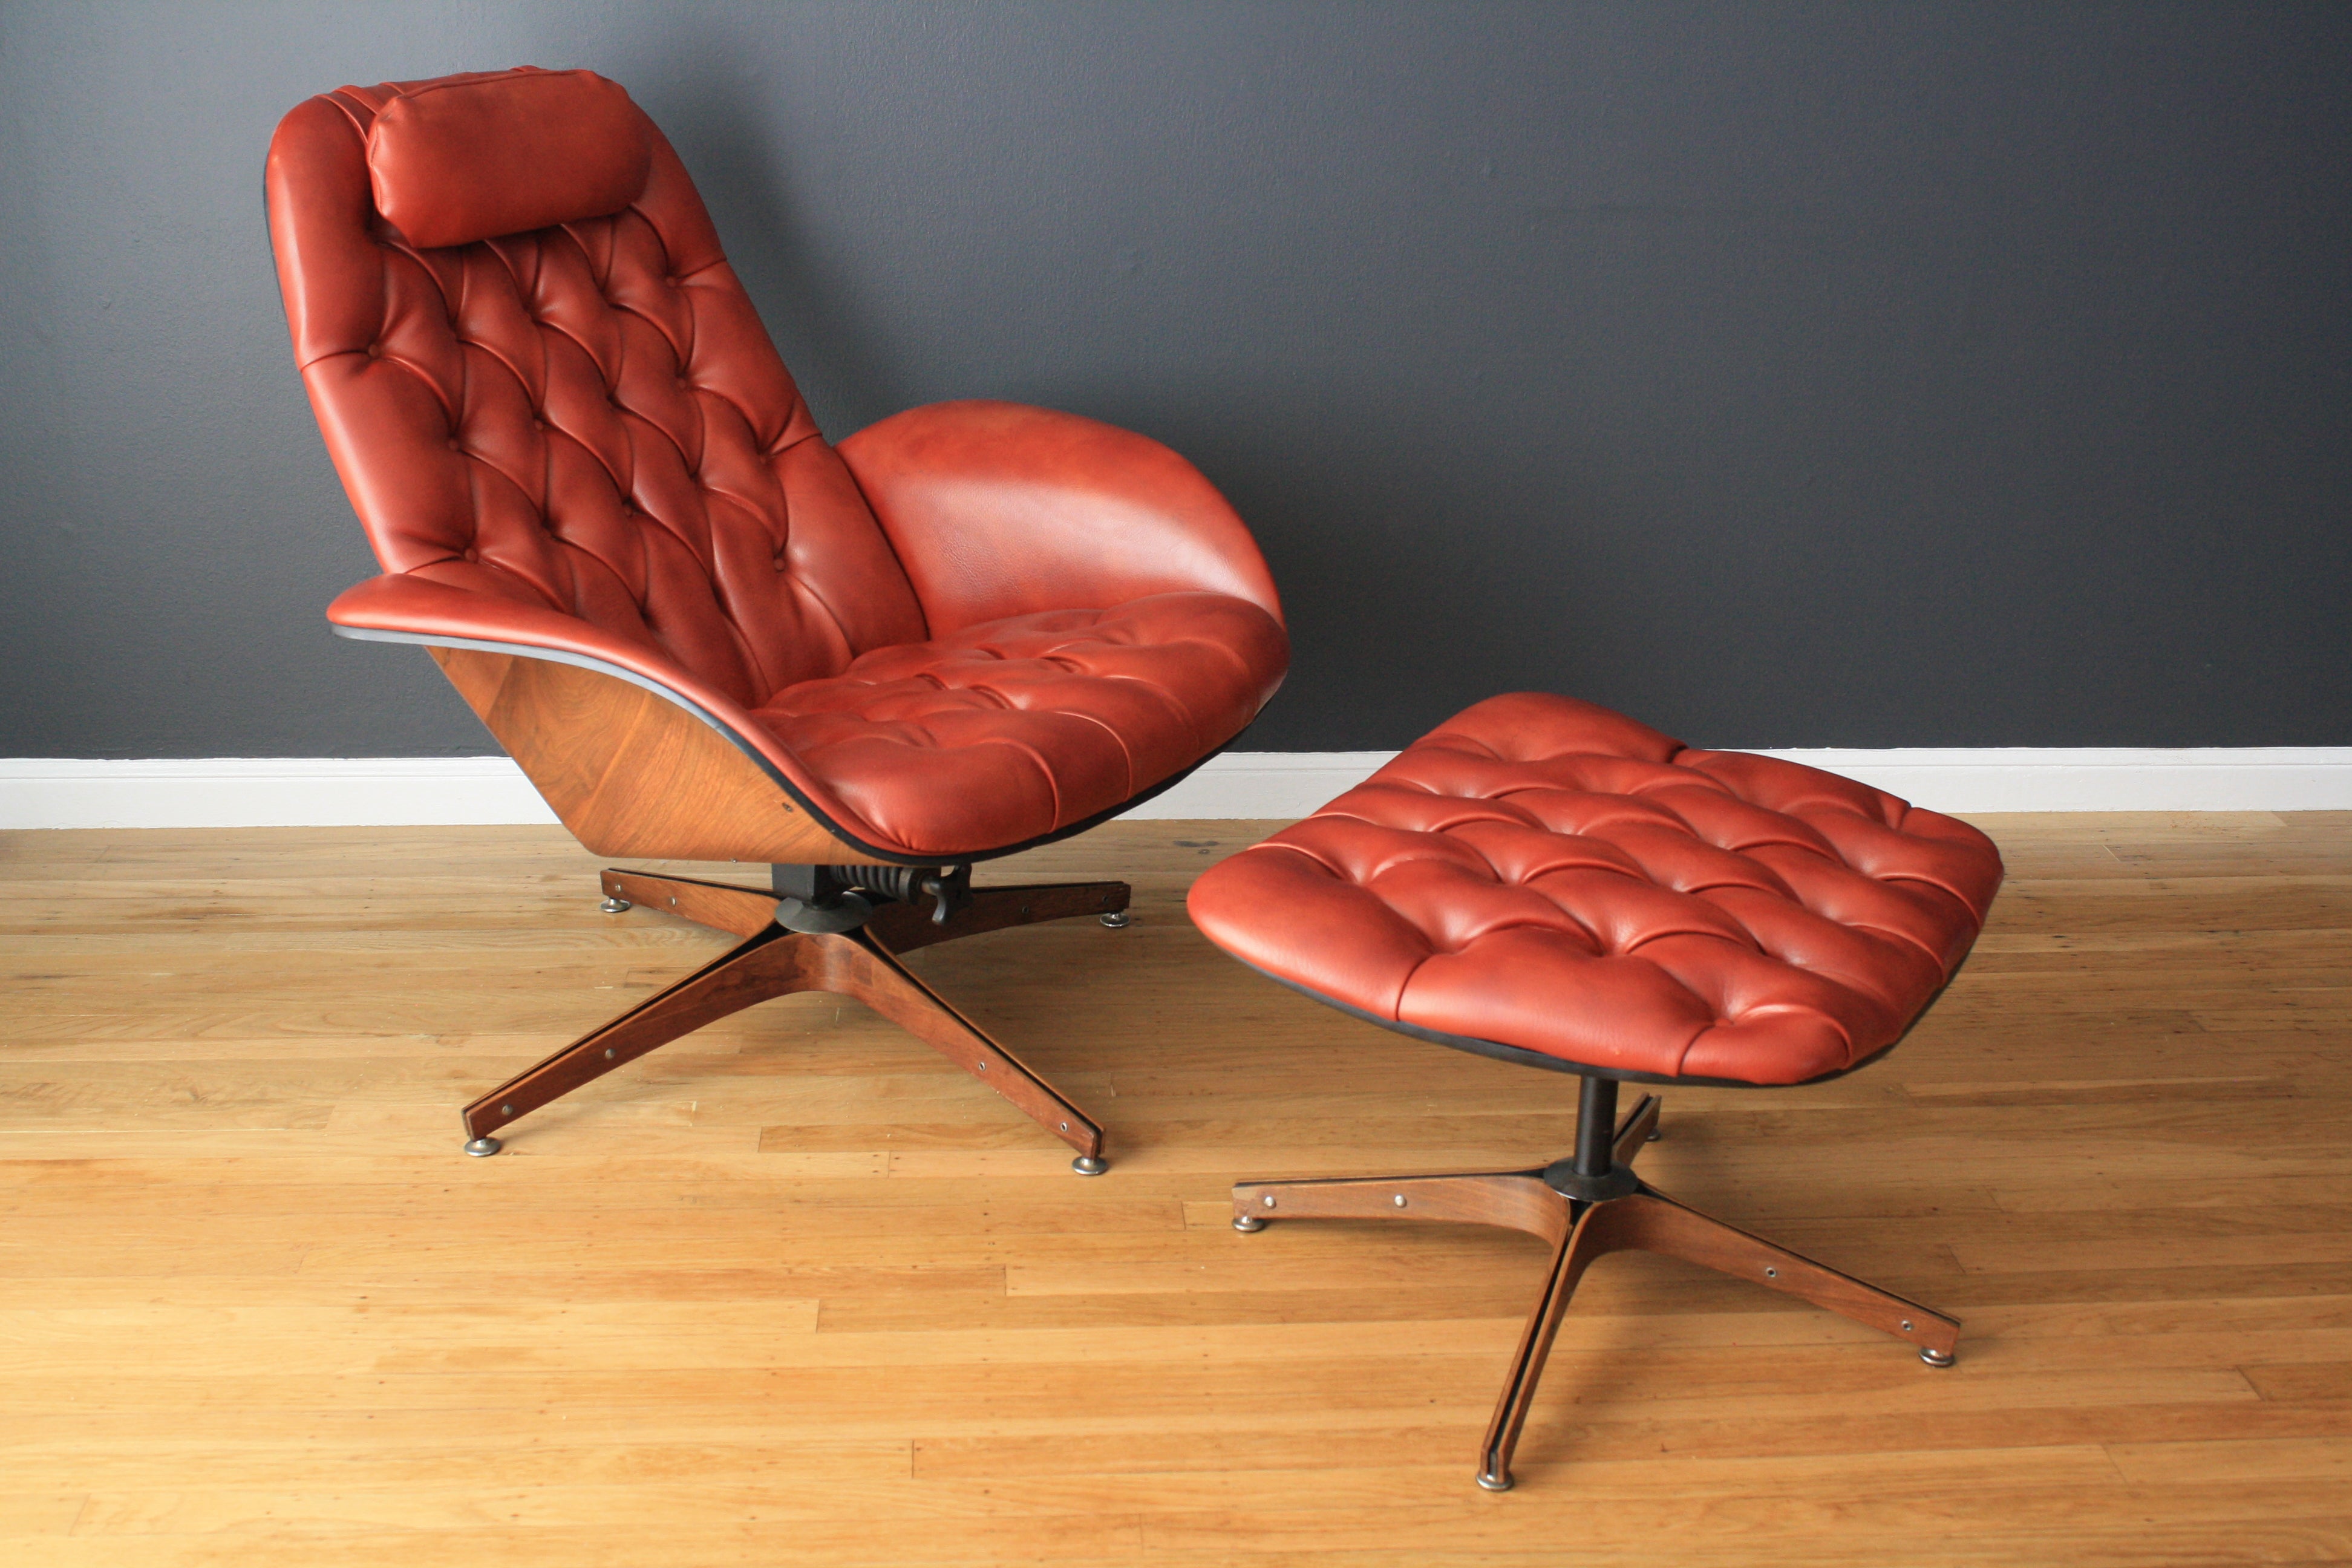 Vintage Lounge Chair and Ottoman by George Mulhauser for Plycraft